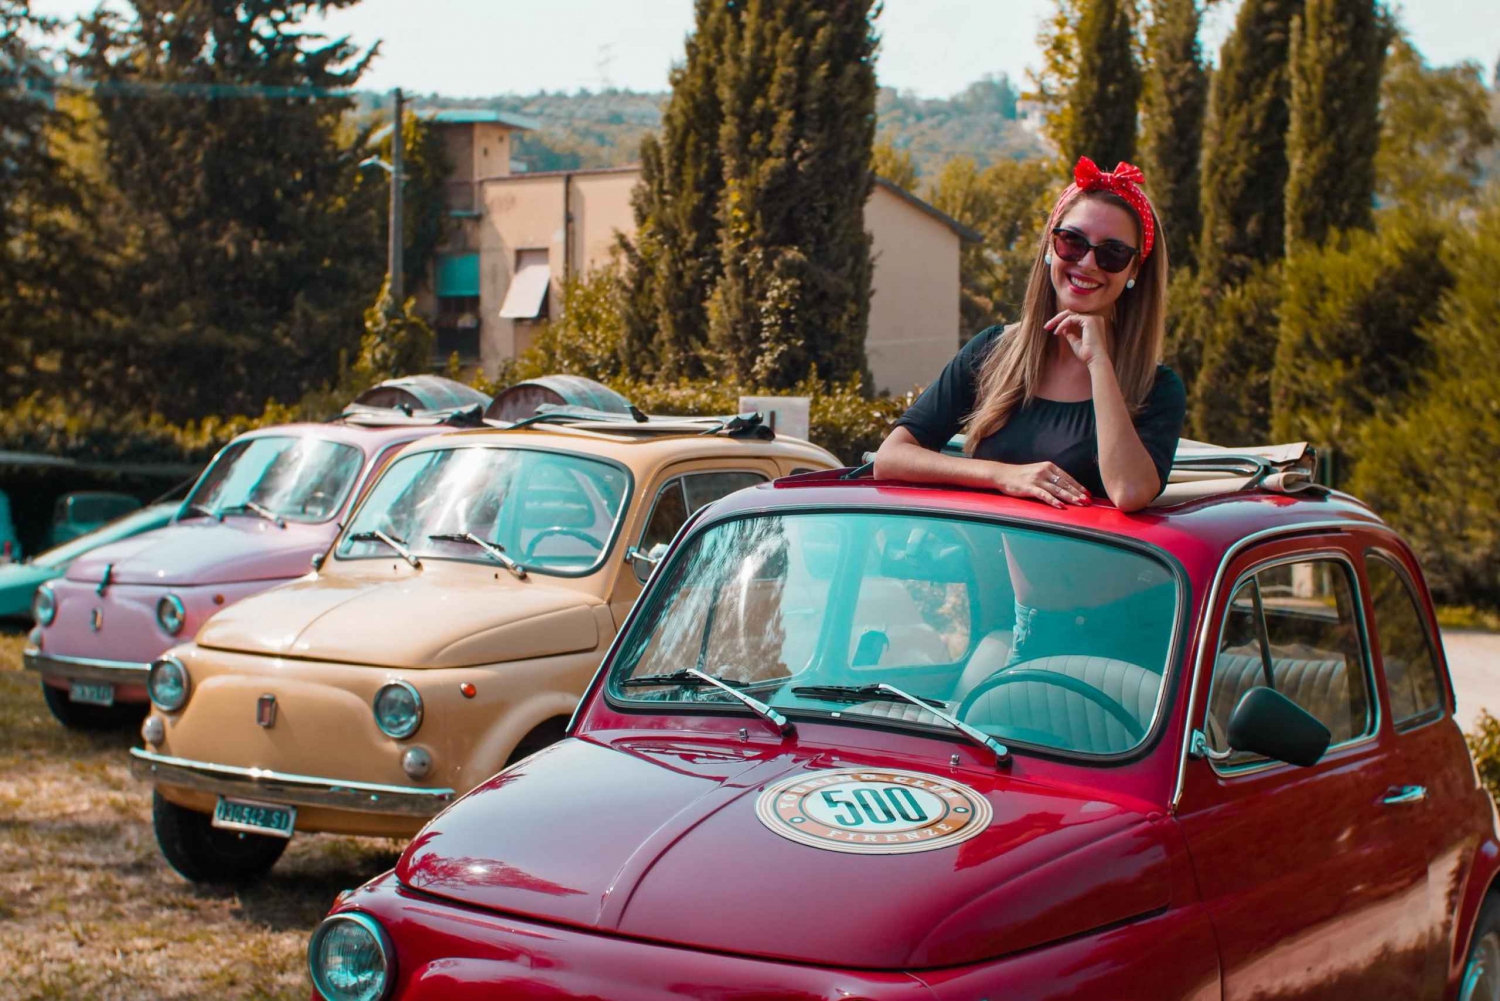 From Florence: Self-Drive Fiat 500 Tour